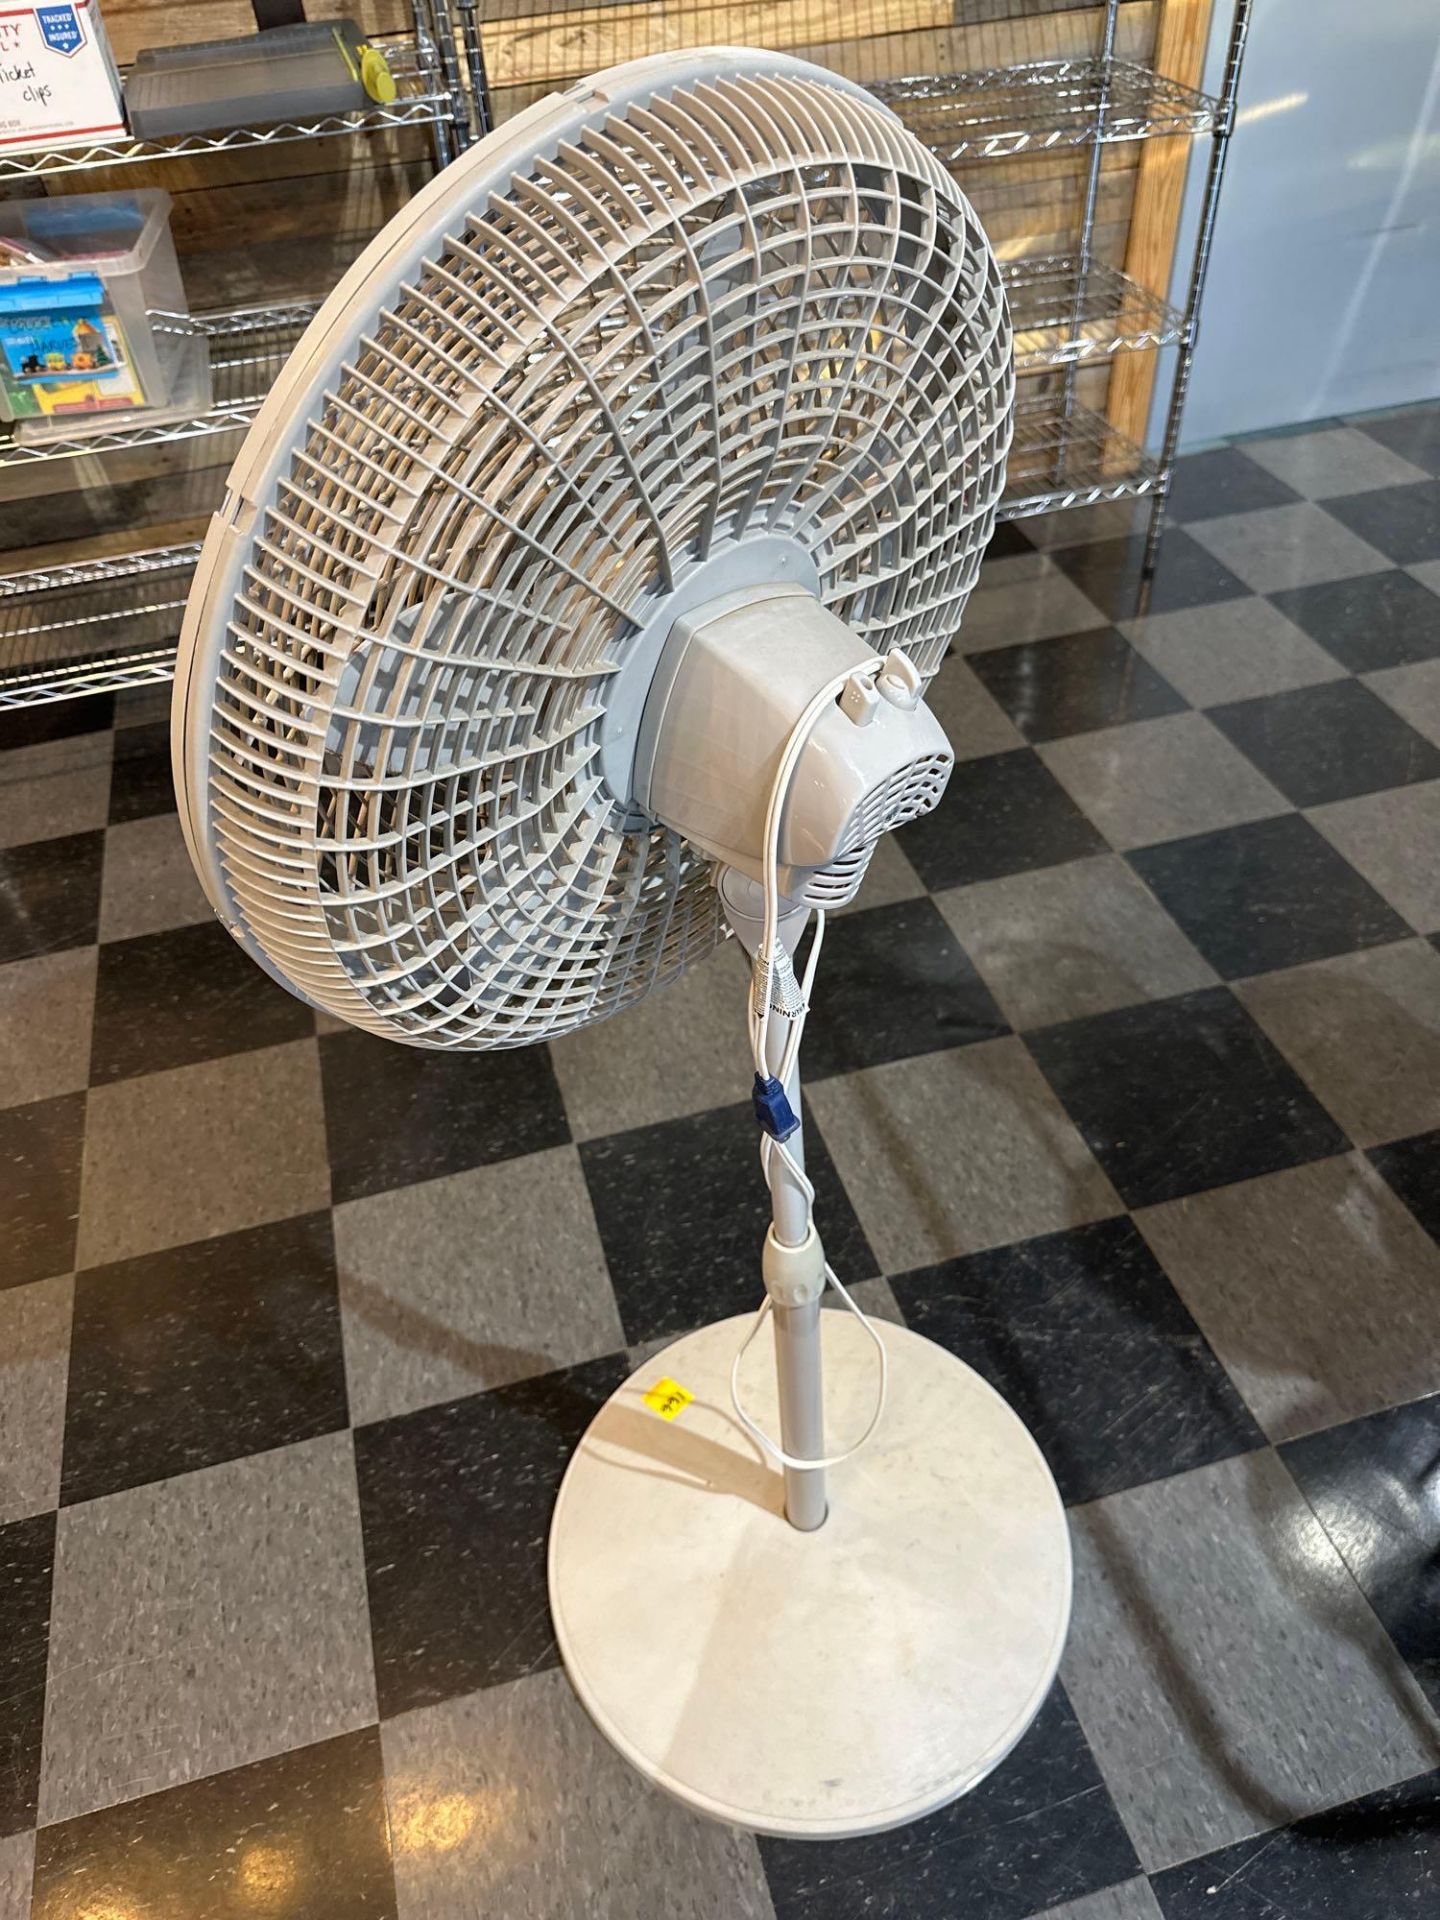 Oscillating fan on stand - Image 2 of 2